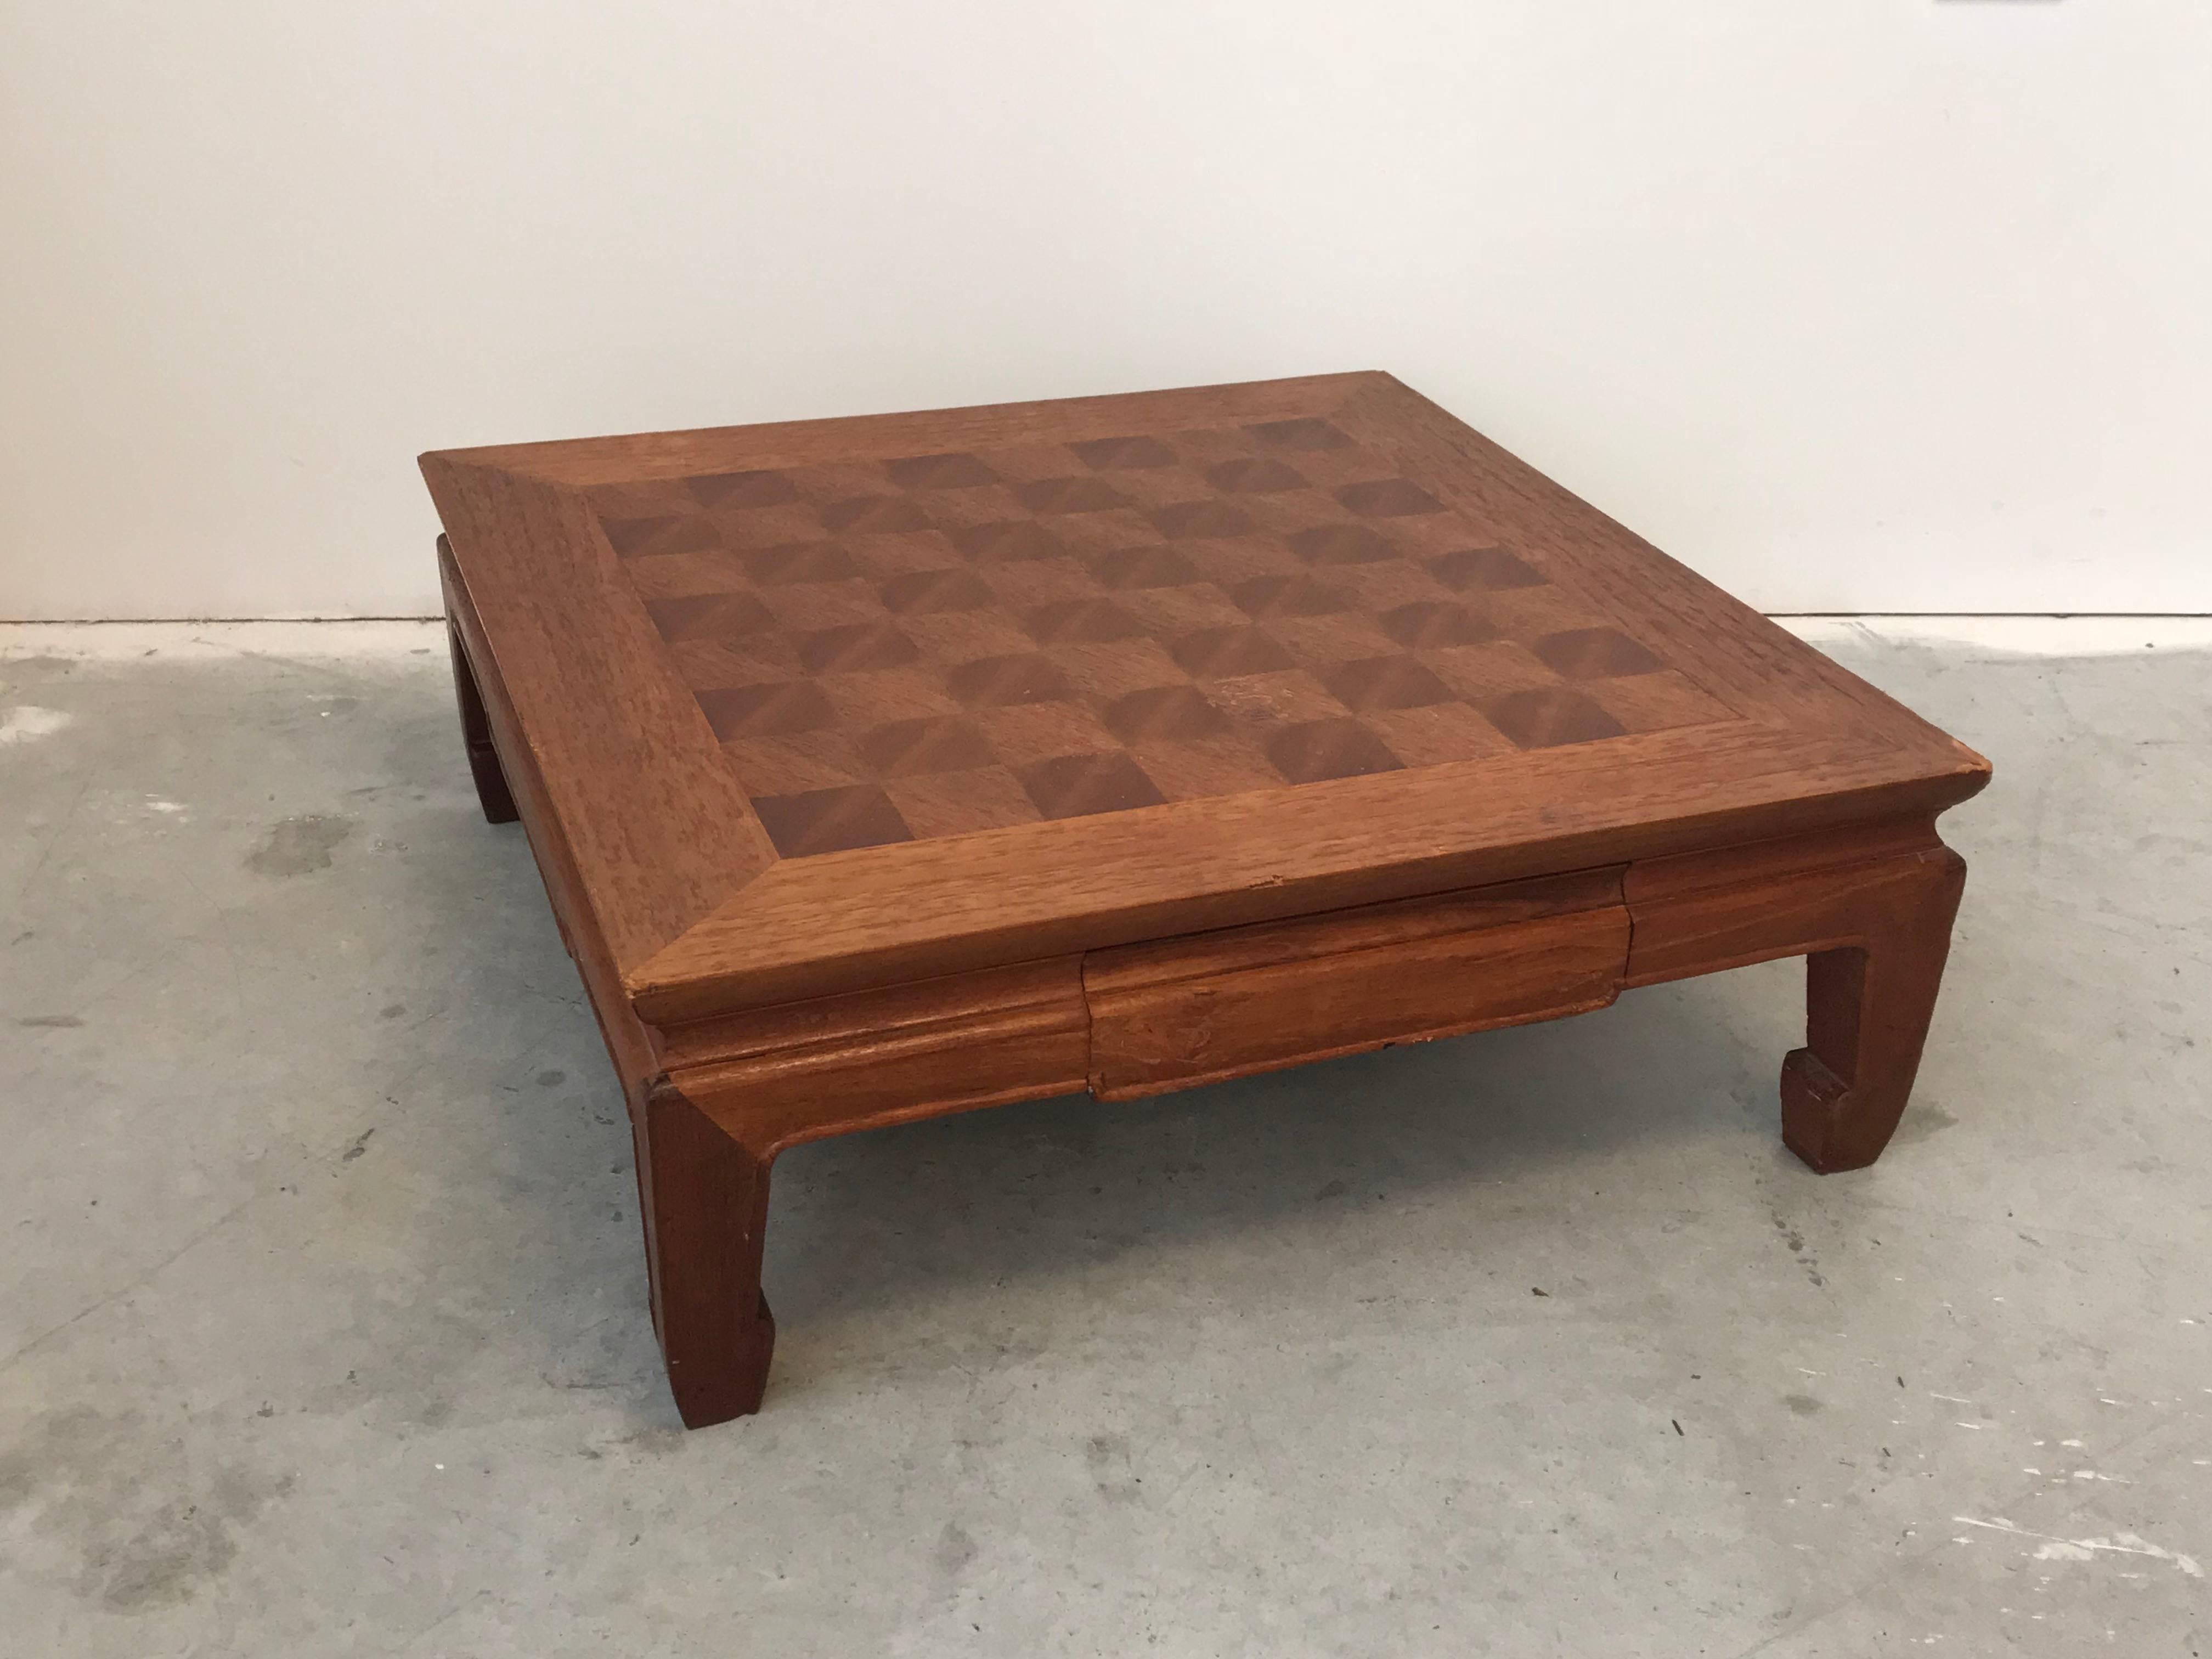 Offered is a beautiful and unique, 1970s Ming-style, wood chessboard. The piece does not include chess pieces, the listing is for the board only. Has a drawer to store pieces. Heavy. Could be used as a riser/stand too.